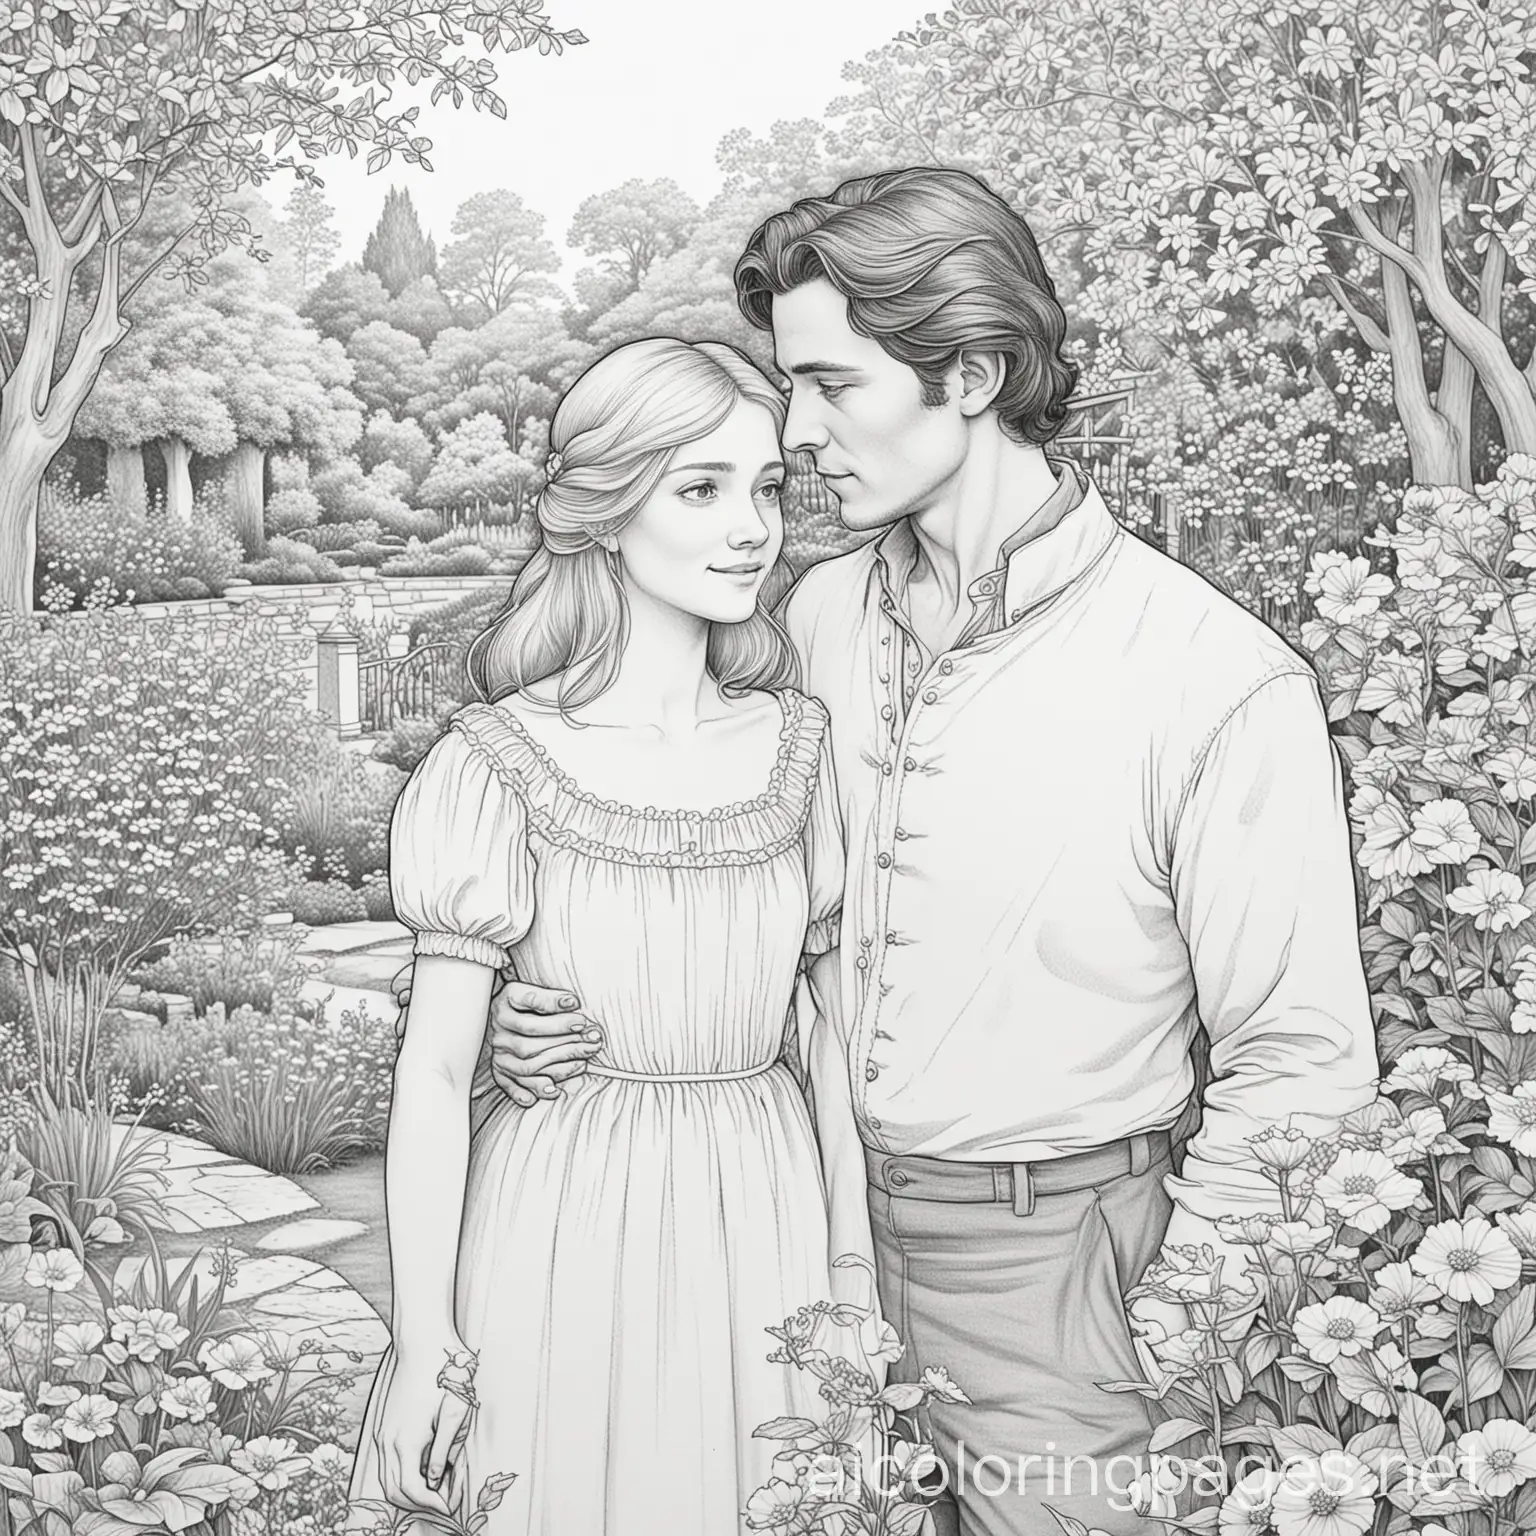 Emma Woodhouse and George Knightley from "Emma" in a beautiful garden in love, Coloring Page, black and white, line art, white background, Simplicity, Ample White Space. The background of the coloring page is plain white to make it easy for young children to color within the lines. The outlines of all the subjects are easy to distinguish, making it simple for kids to color without too much difficulty